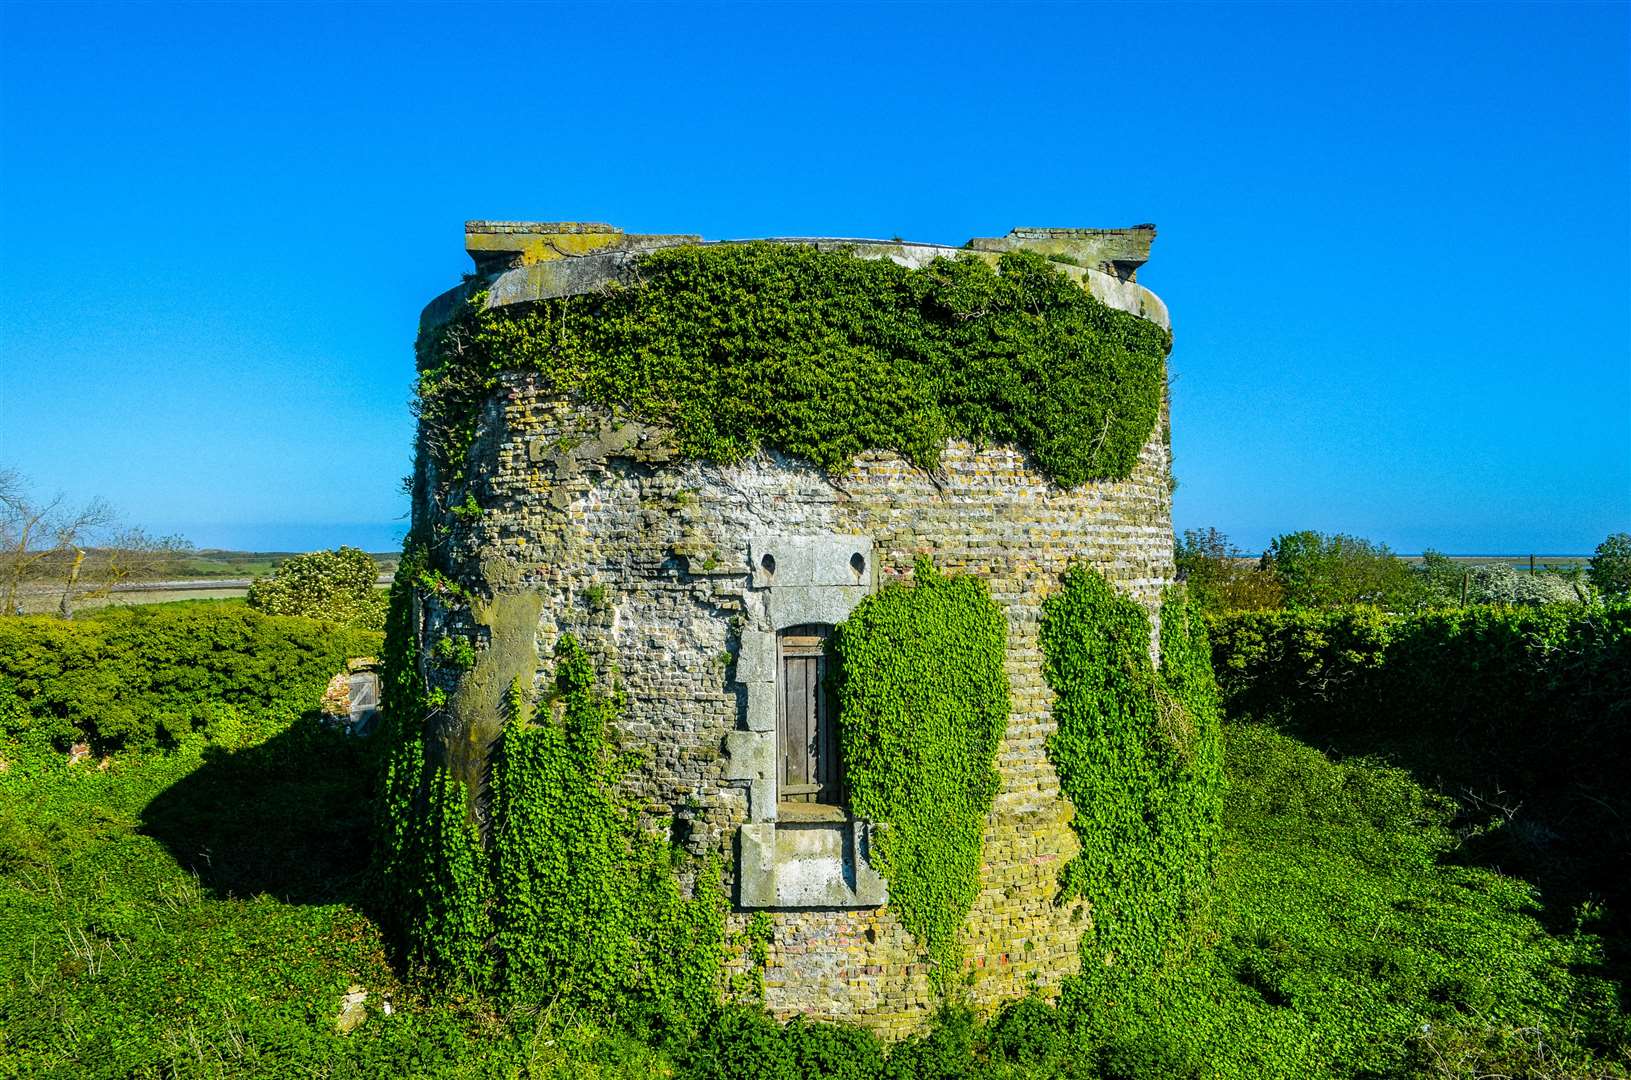 Rye tower, covered in ivy